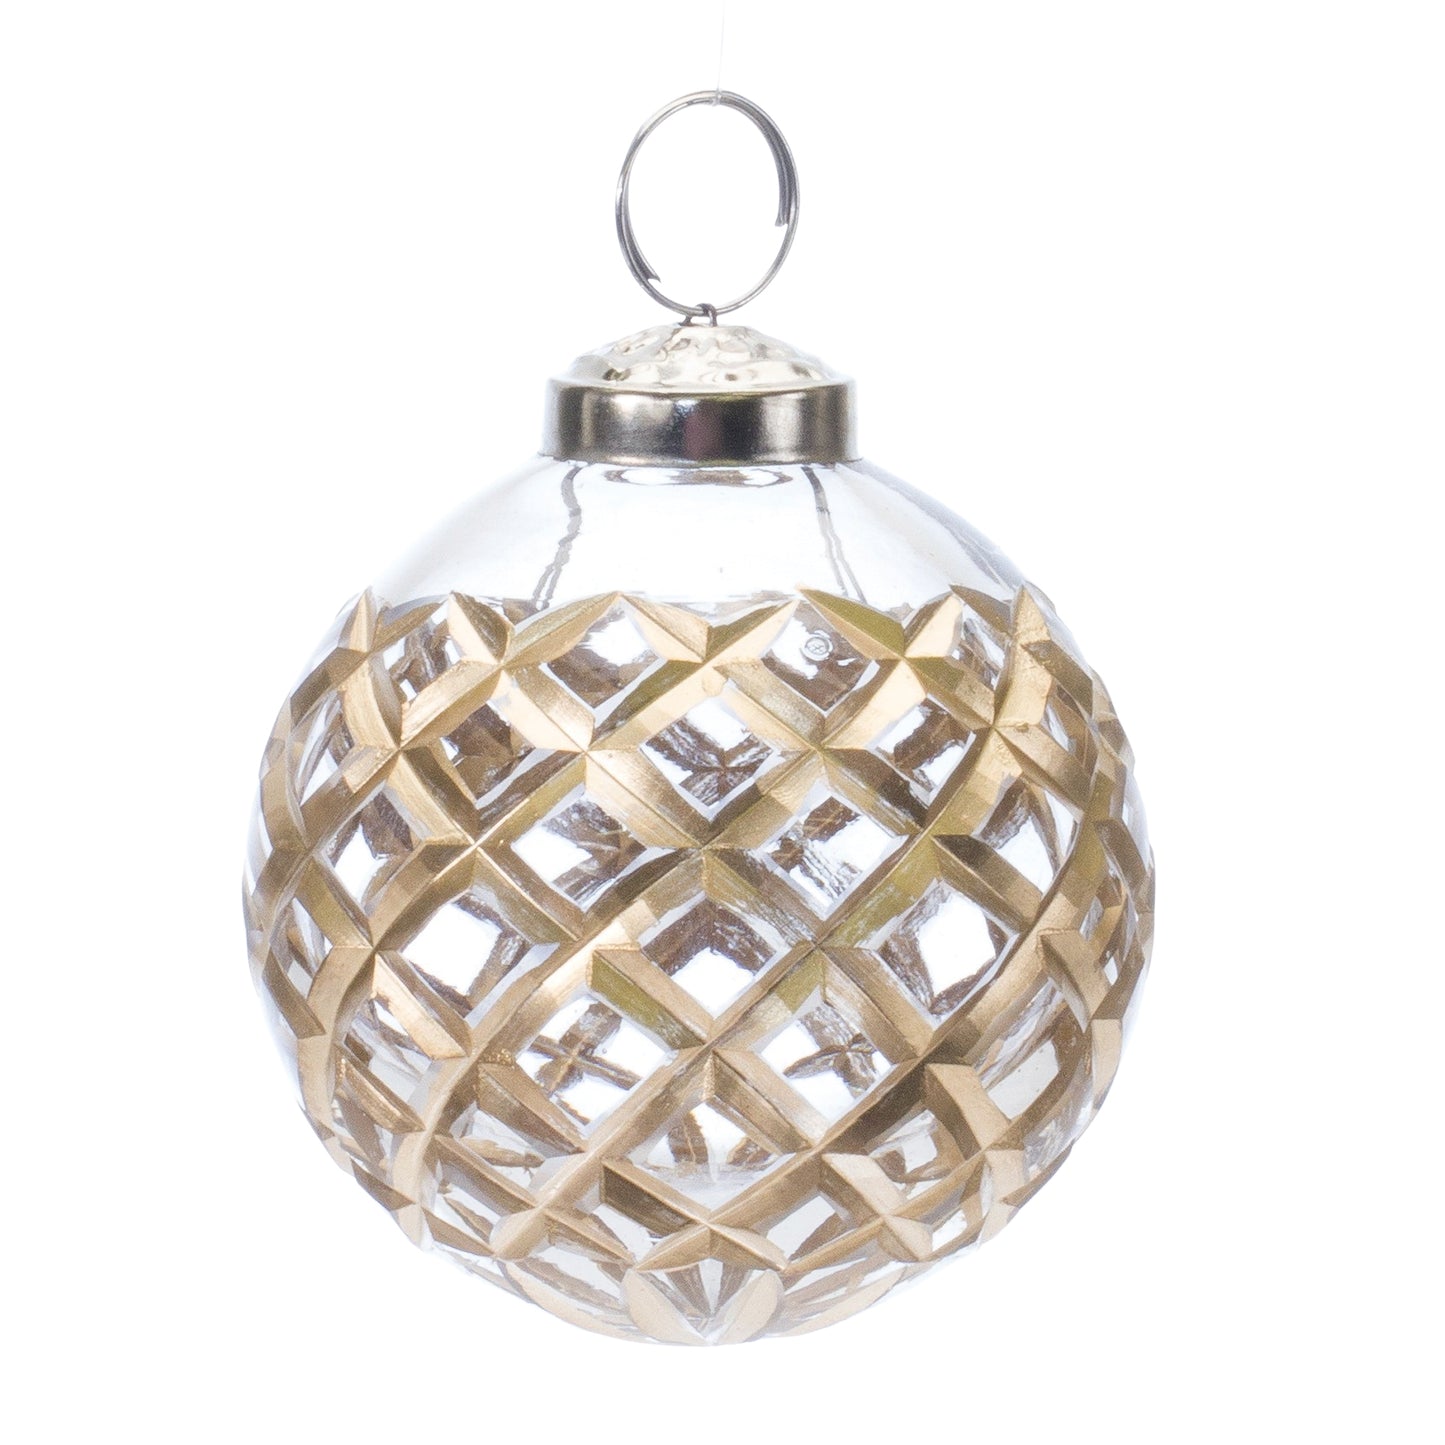 Harlequin Etched Glass Ball Ornament (Set of 6)